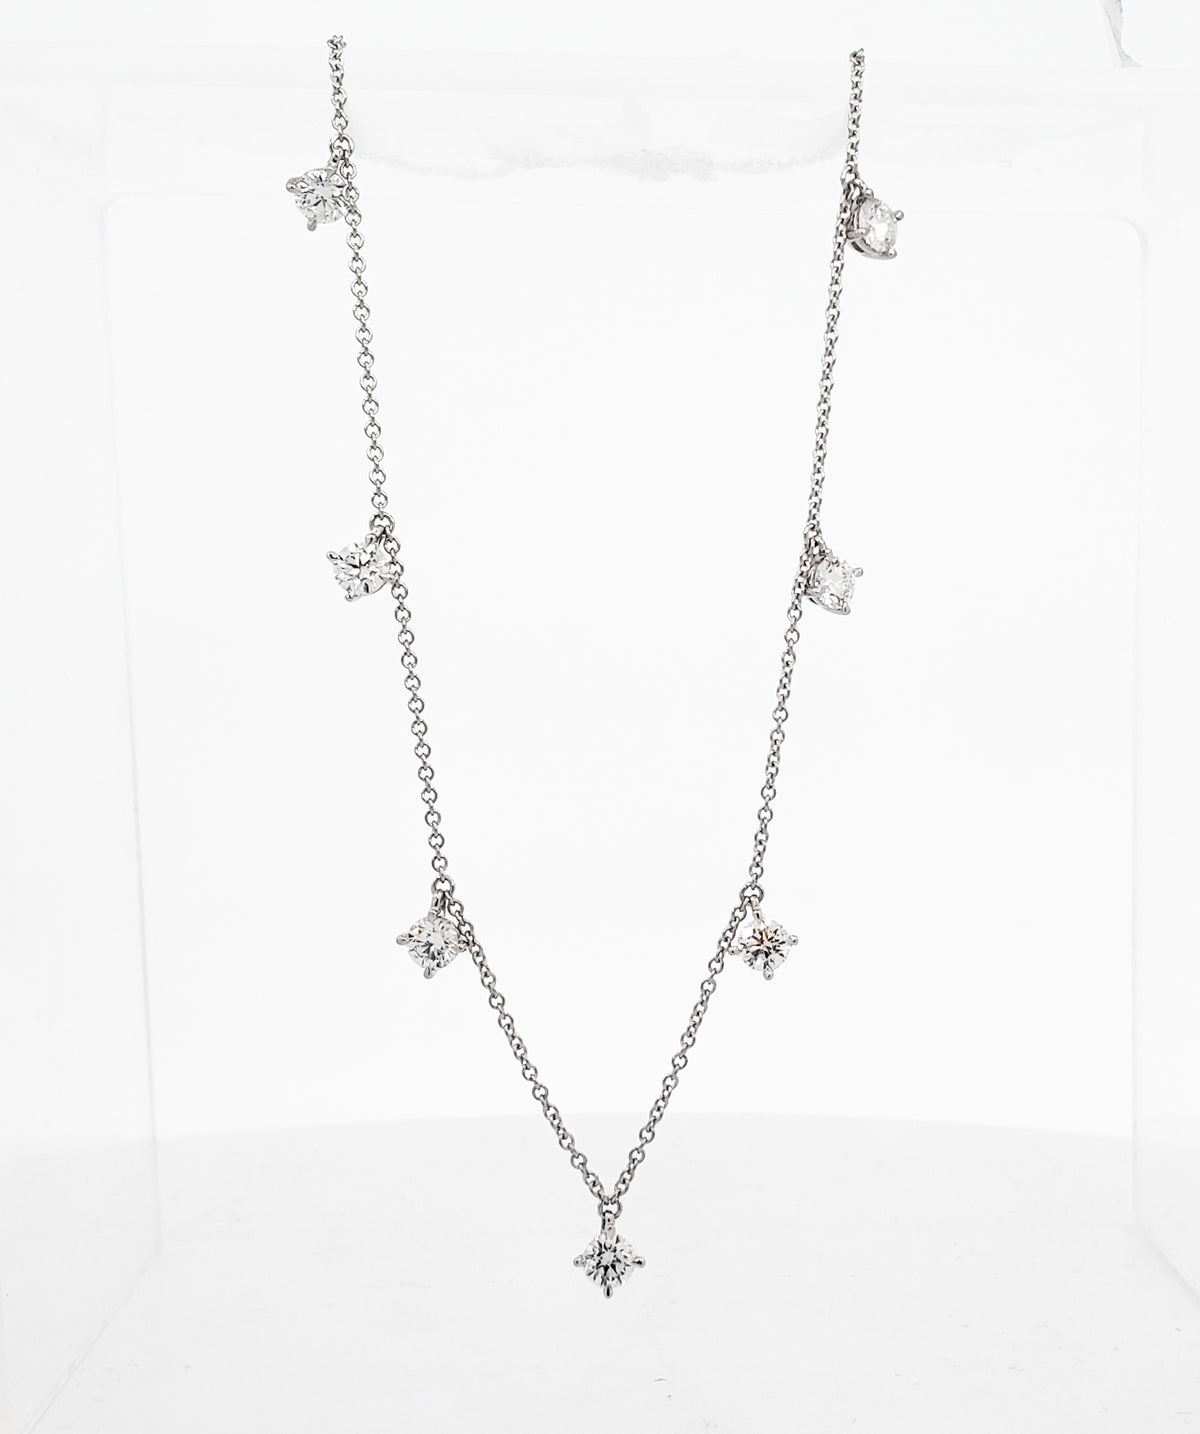 14K White Gold 1.61cttw Lab Grown Diamond Necklace with Rolo Chain (Lobster Clasp) - Adjustable 16 - 18 Inches